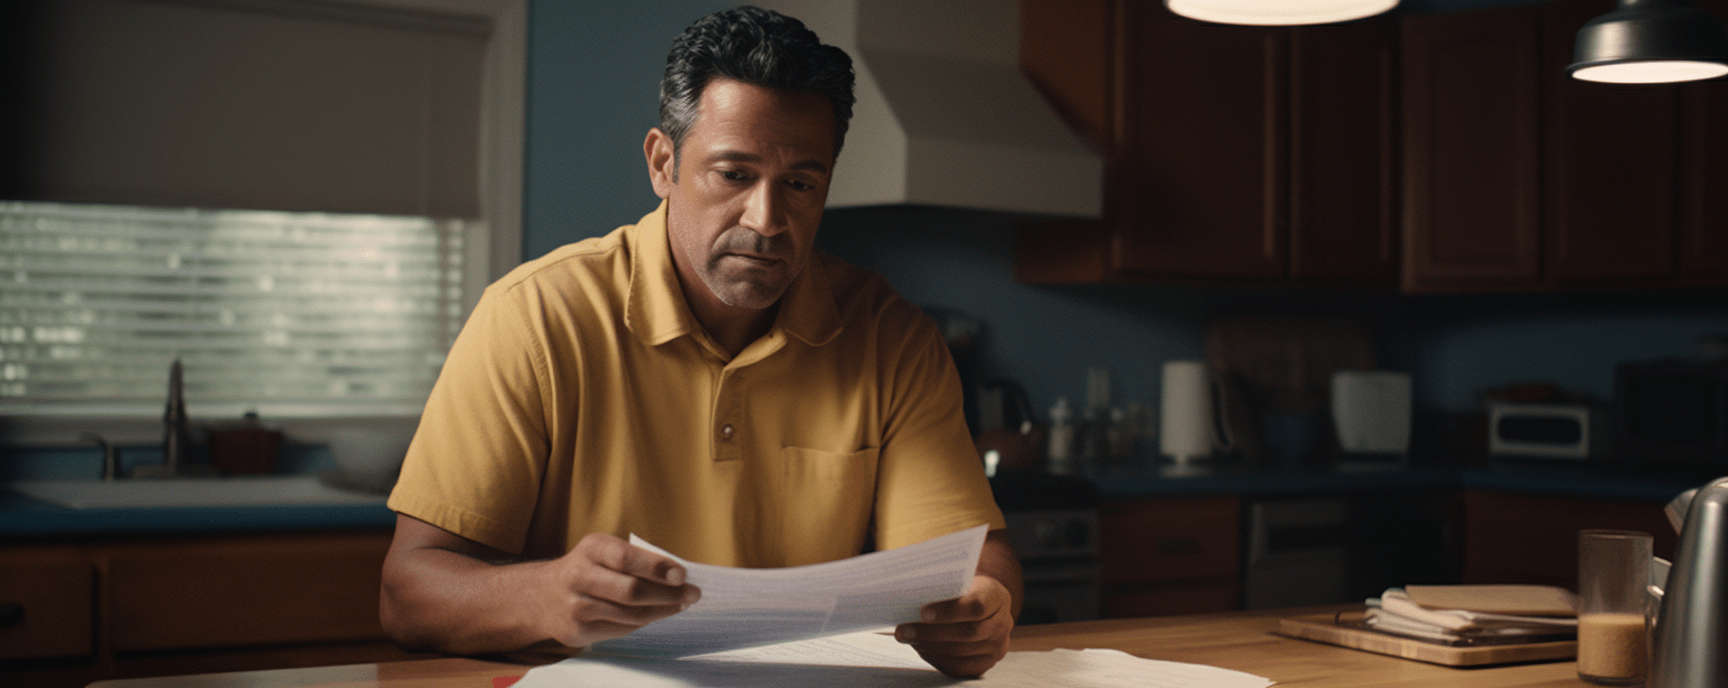 Man frustrated reading SSDI appeal paperwork